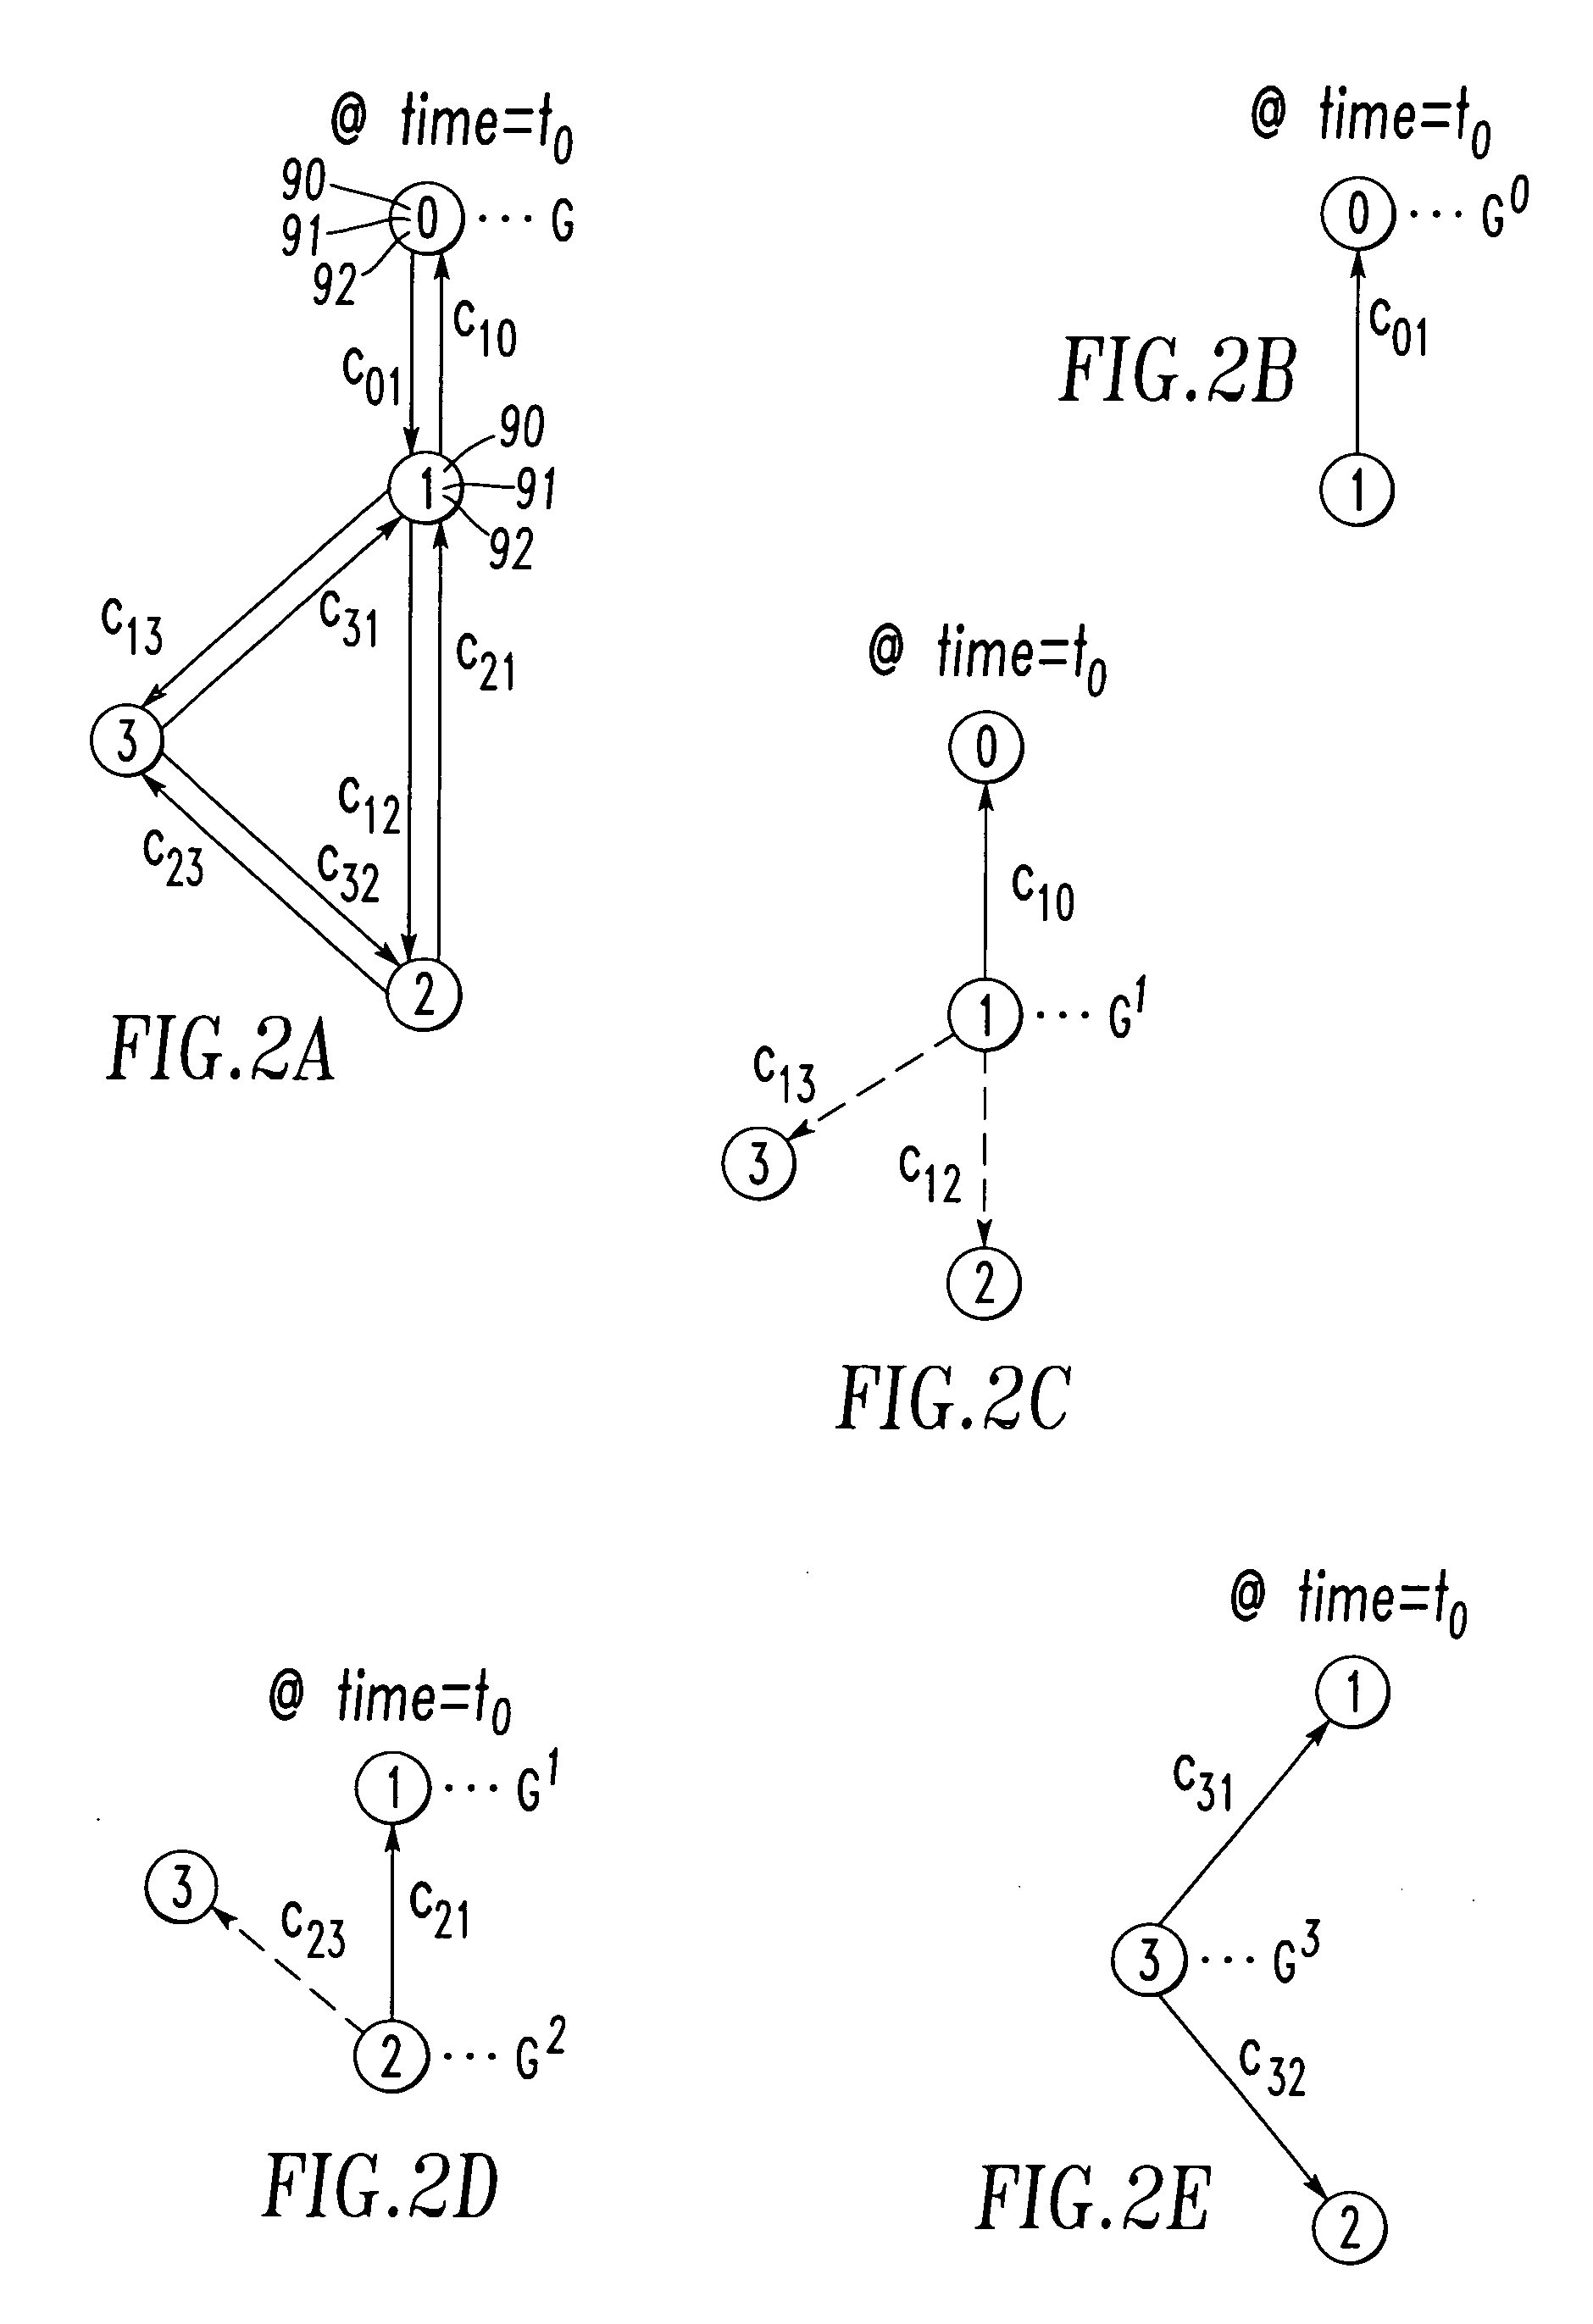 Ad-hoc network and method employing globally optimized routes for packets